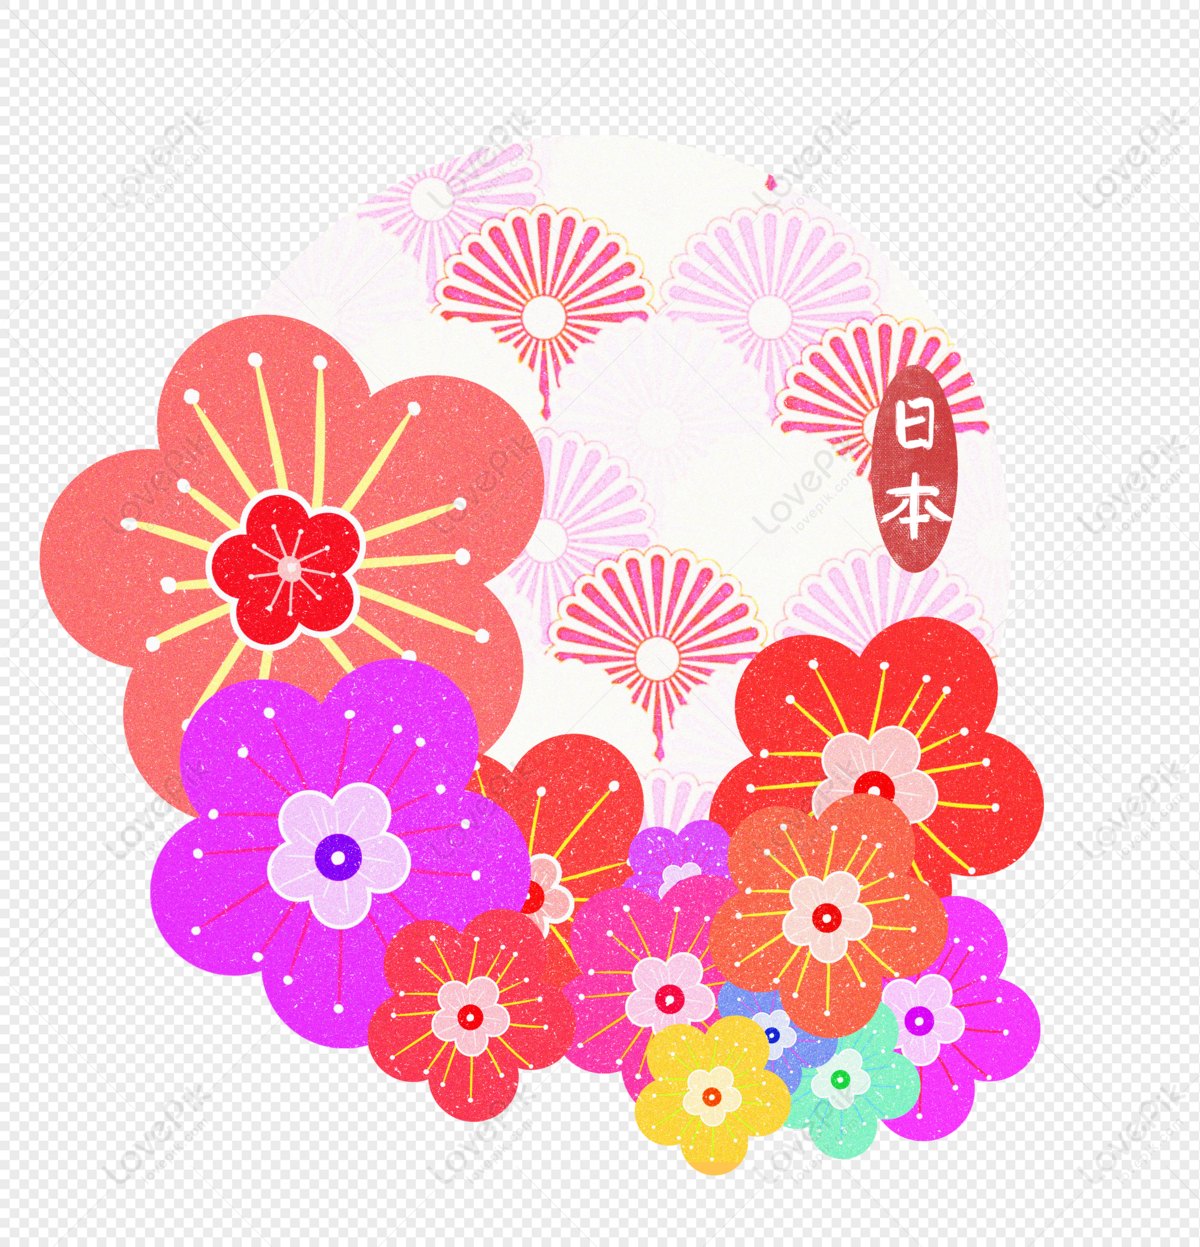 Japanese pattern tour, cute flower, colorful flower, flower vector png image